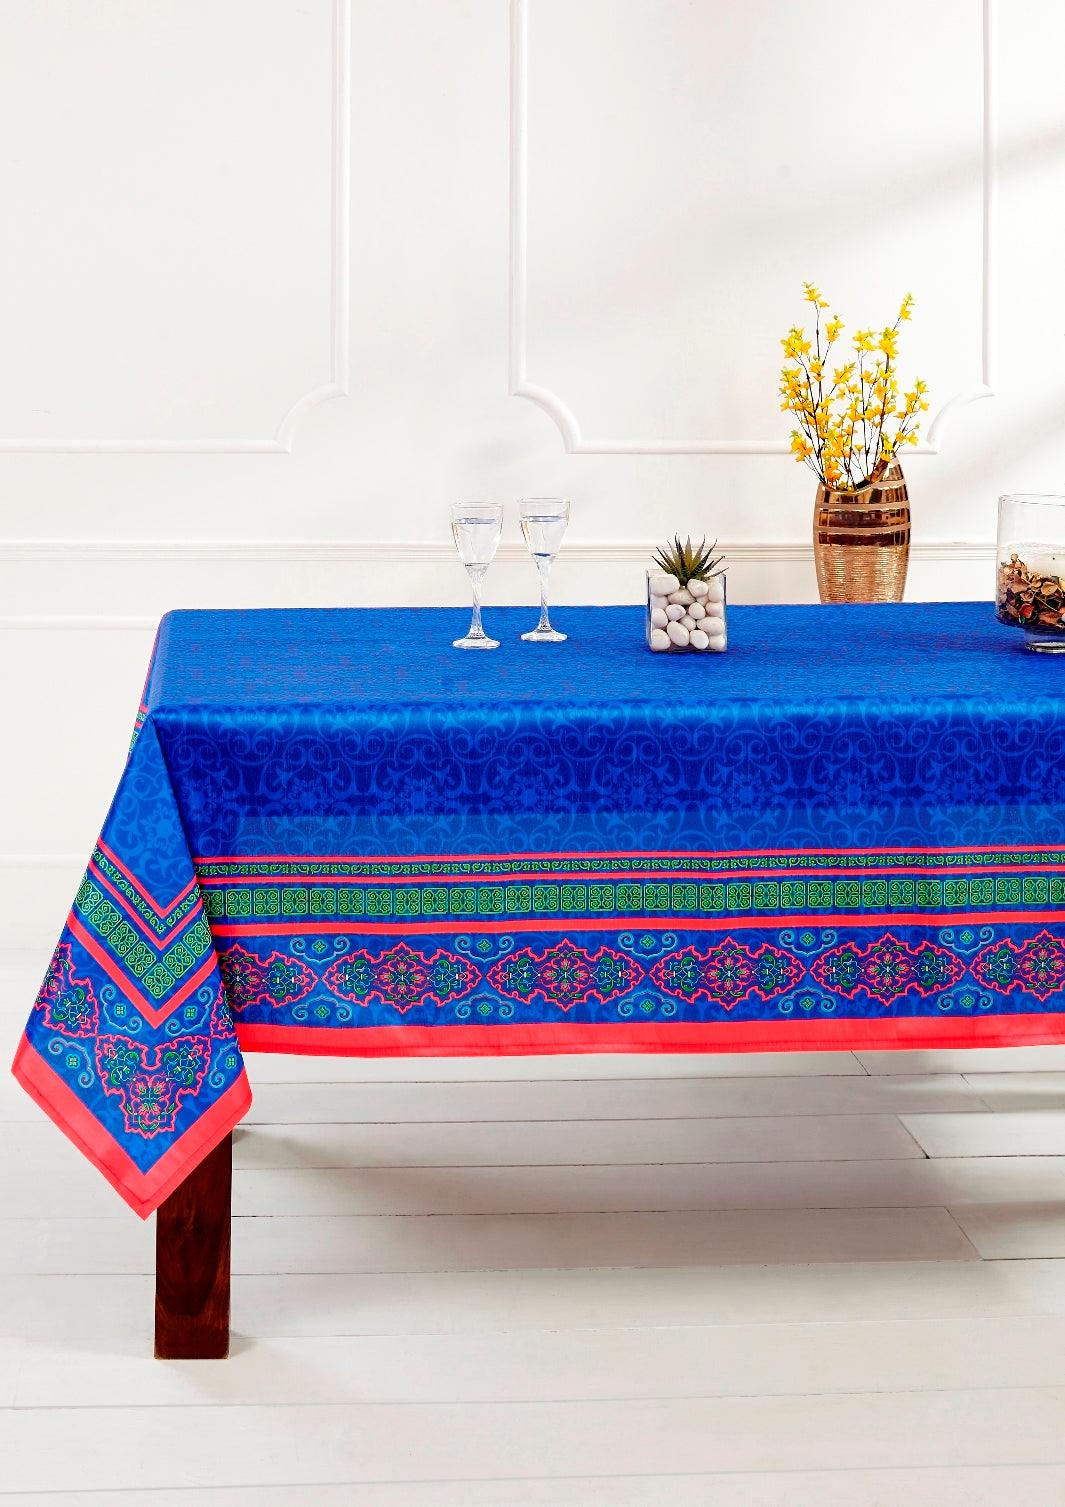 Neon Leaf Printed Table Cover - shahenazindia